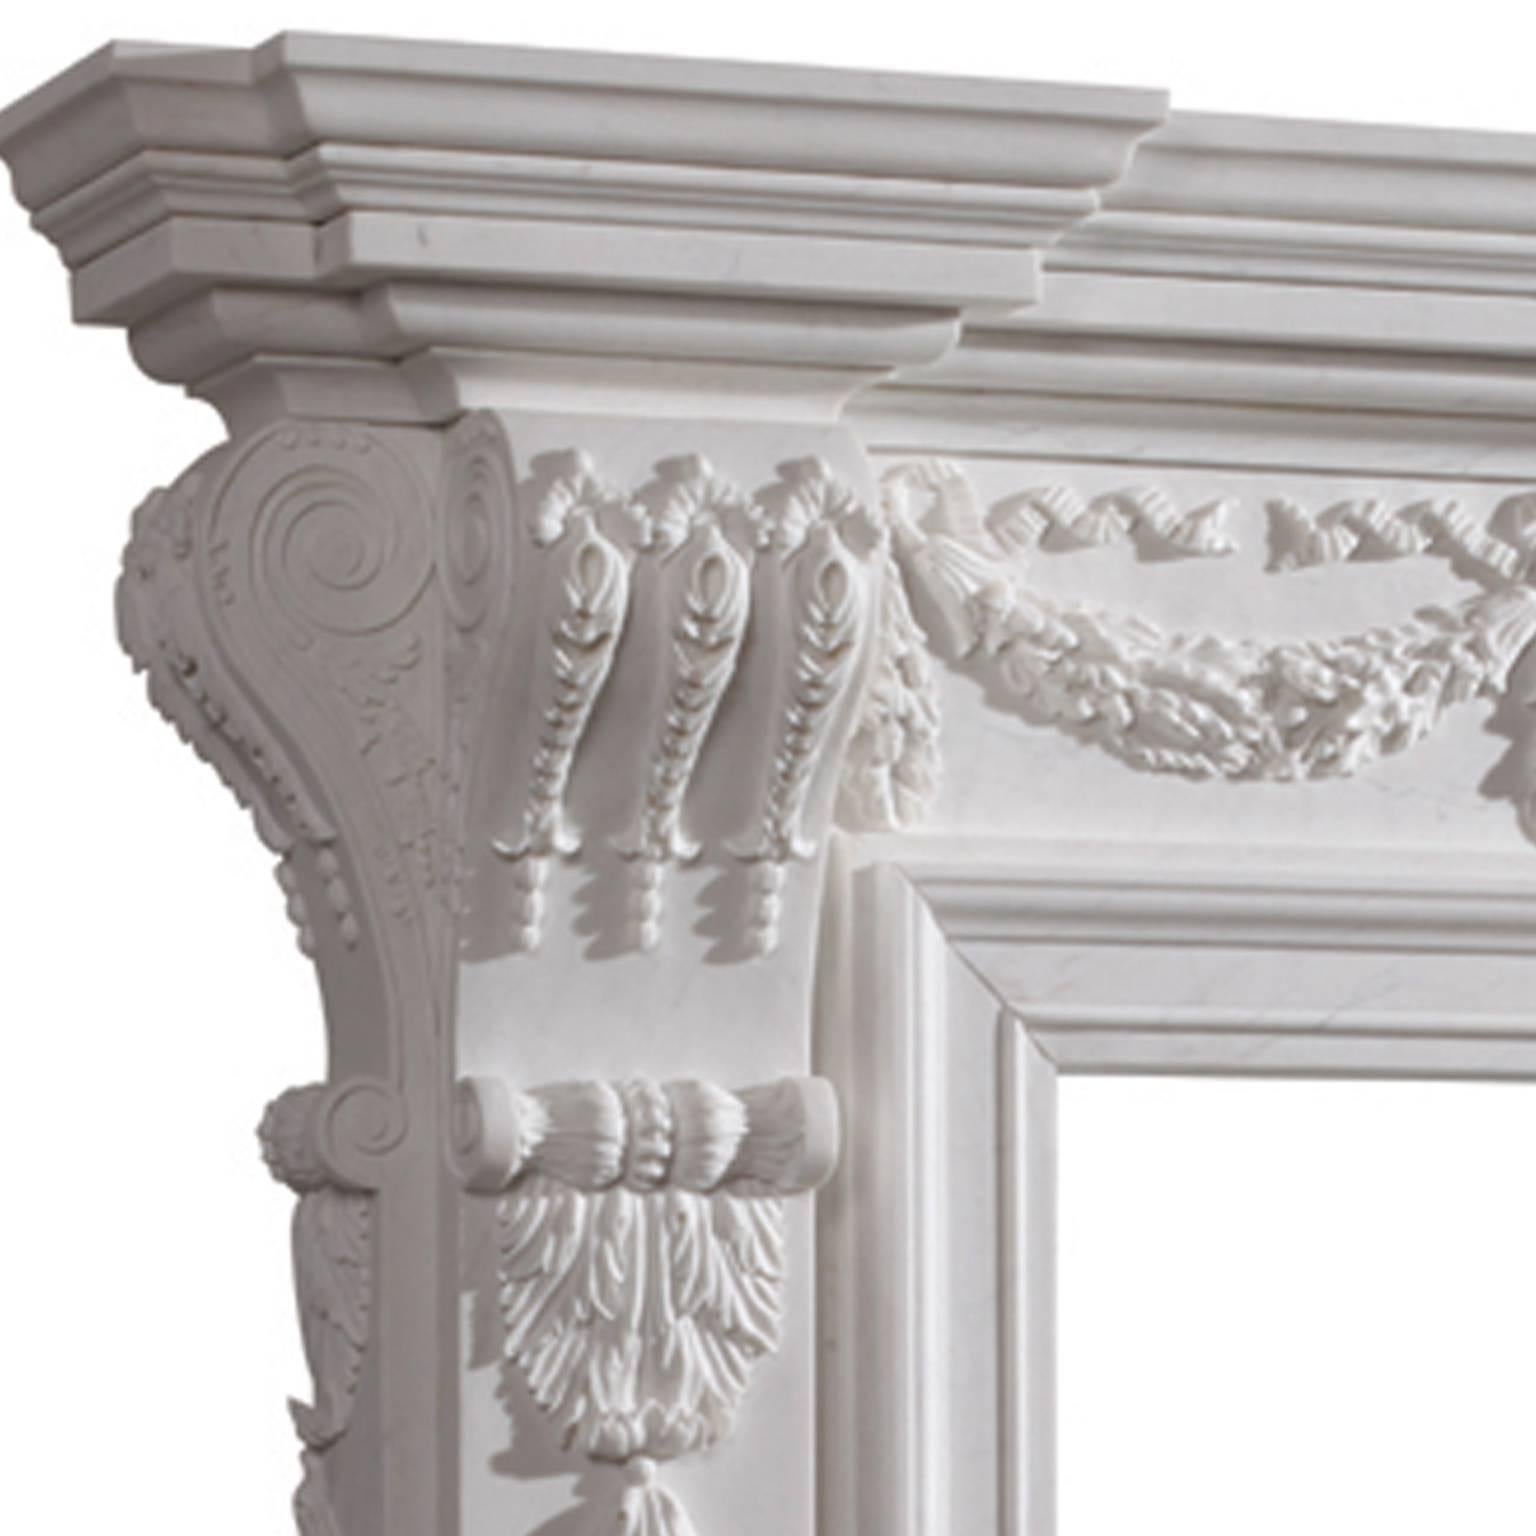 This unique fireplace produced under license from marble hill house, the great room. This large, imposing chimney-piece is based on a lavish design dating from circa 1729. Inspired by the work of the 17th century architect and stage designer Inigo